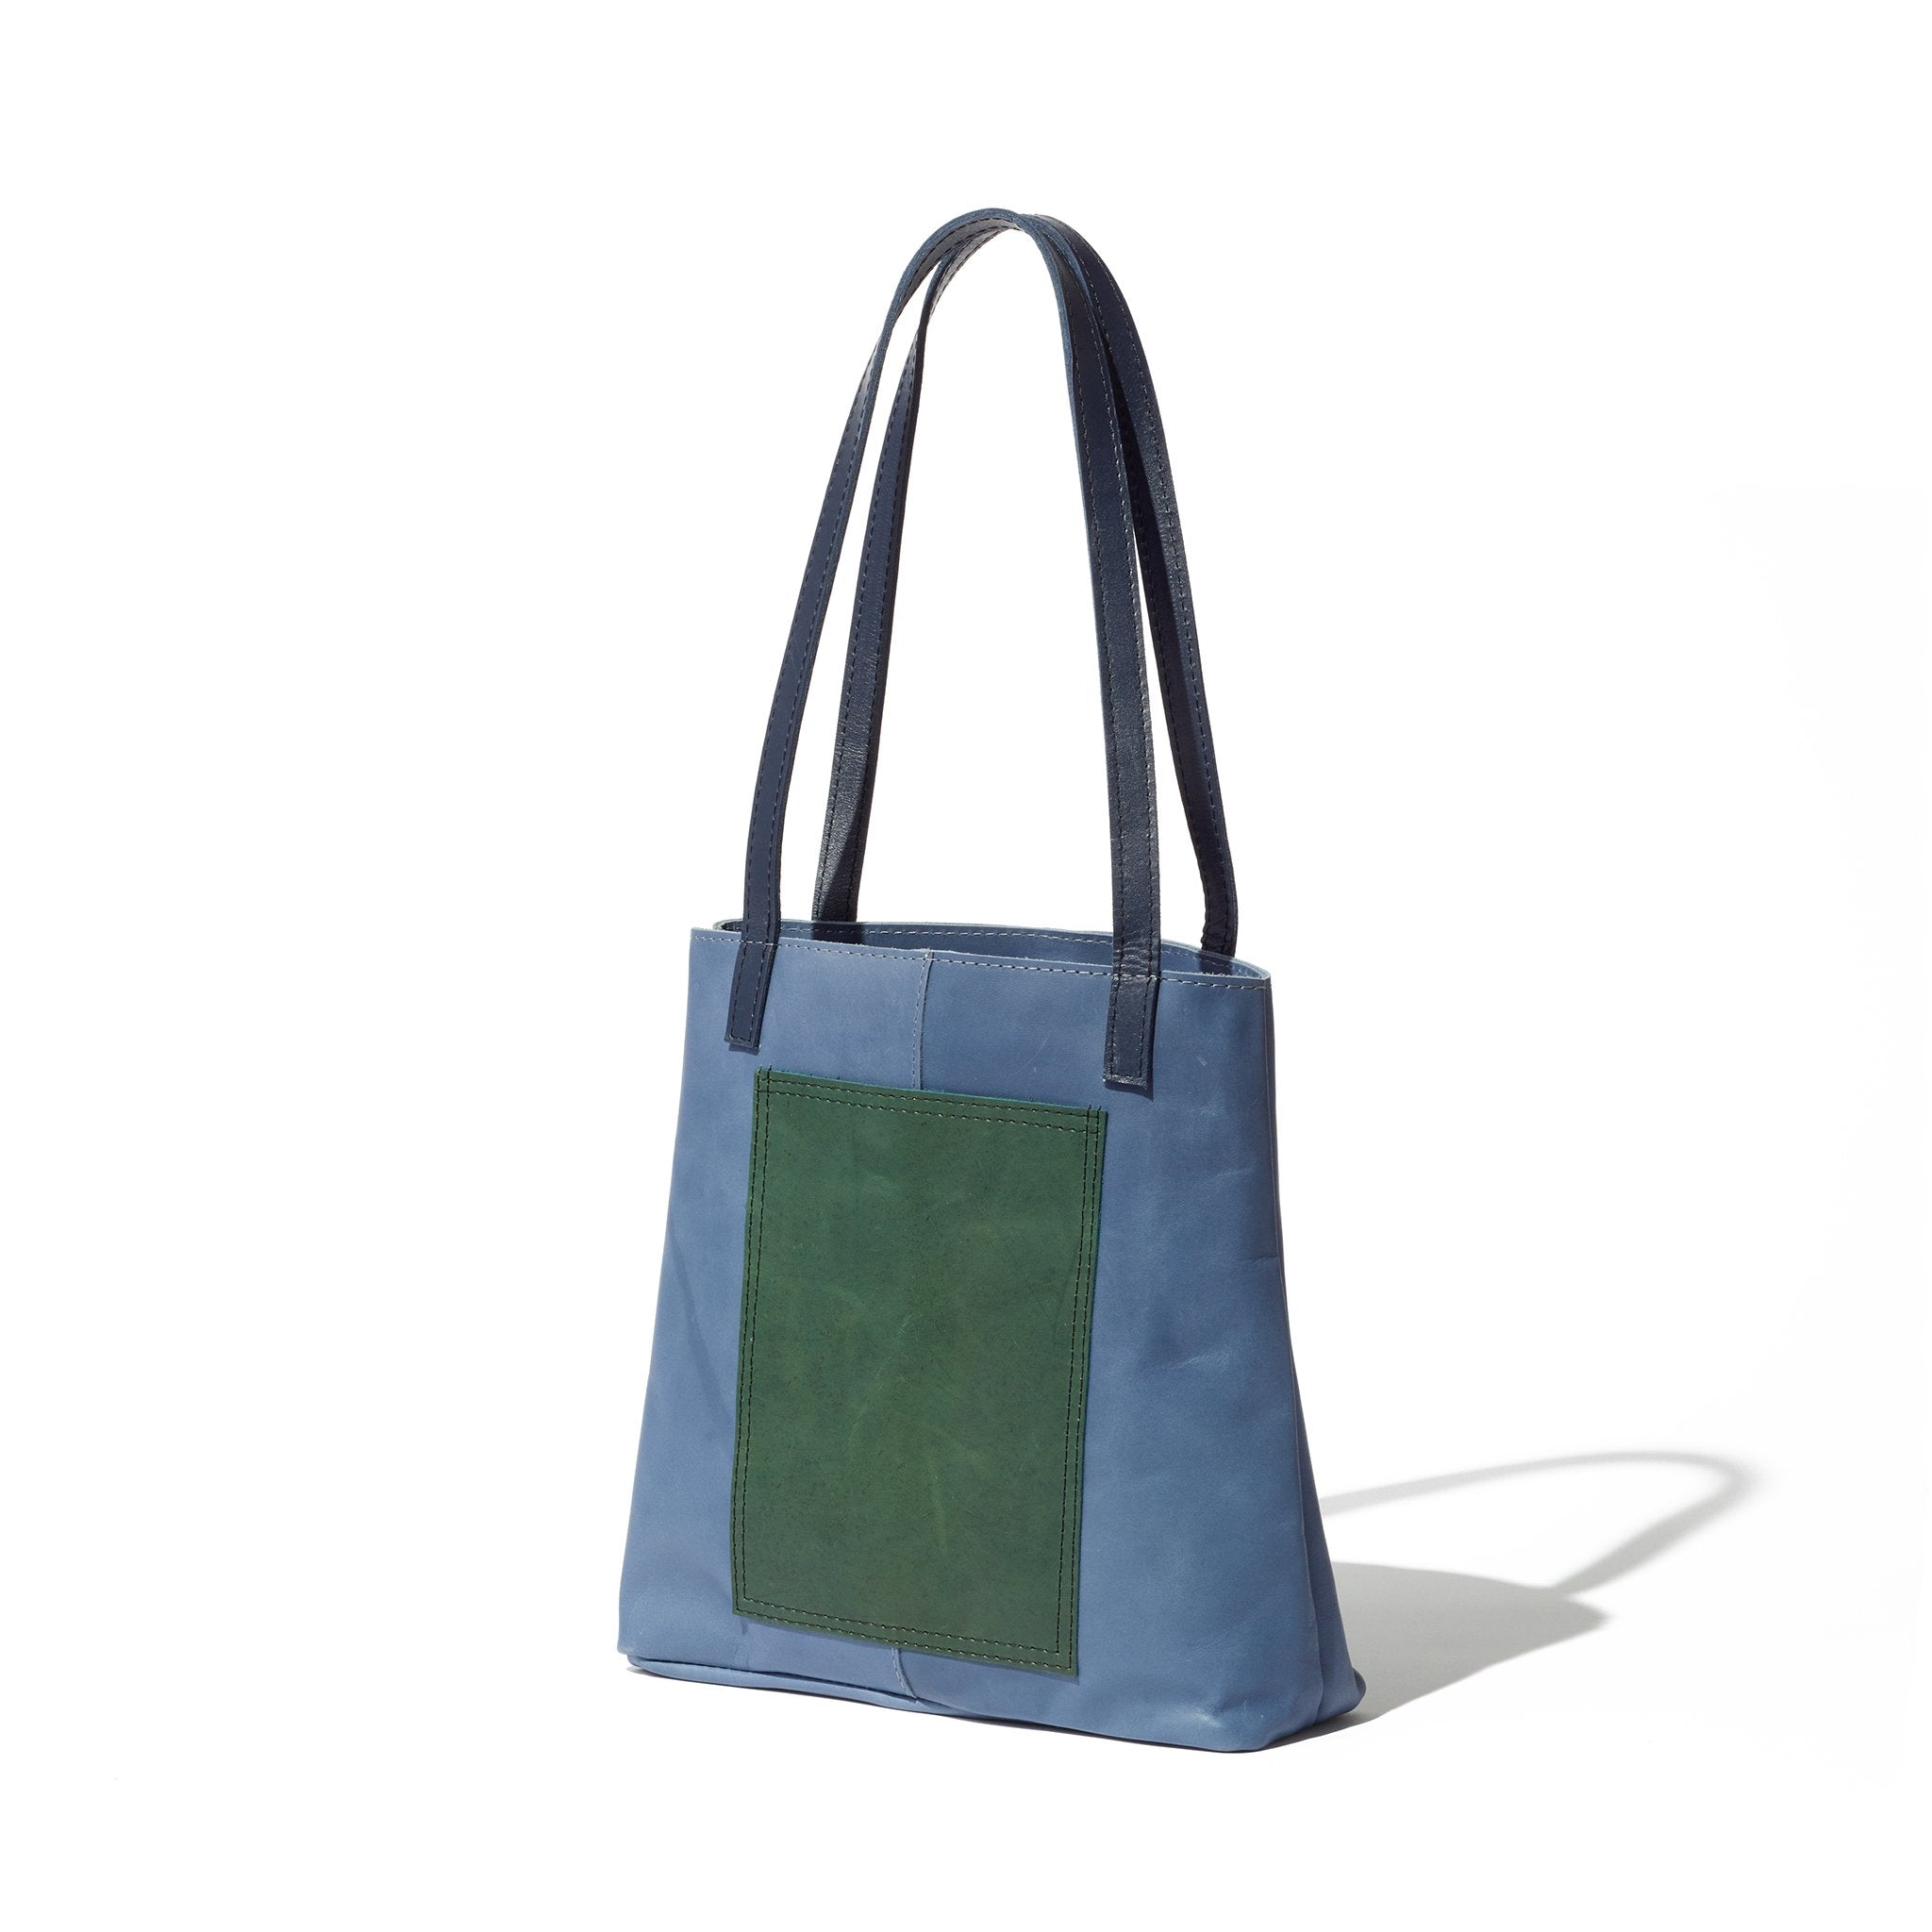 Just the right size for everyday, this blue and green tote is handcrafted from sustainable leather and features an exterior pocket.